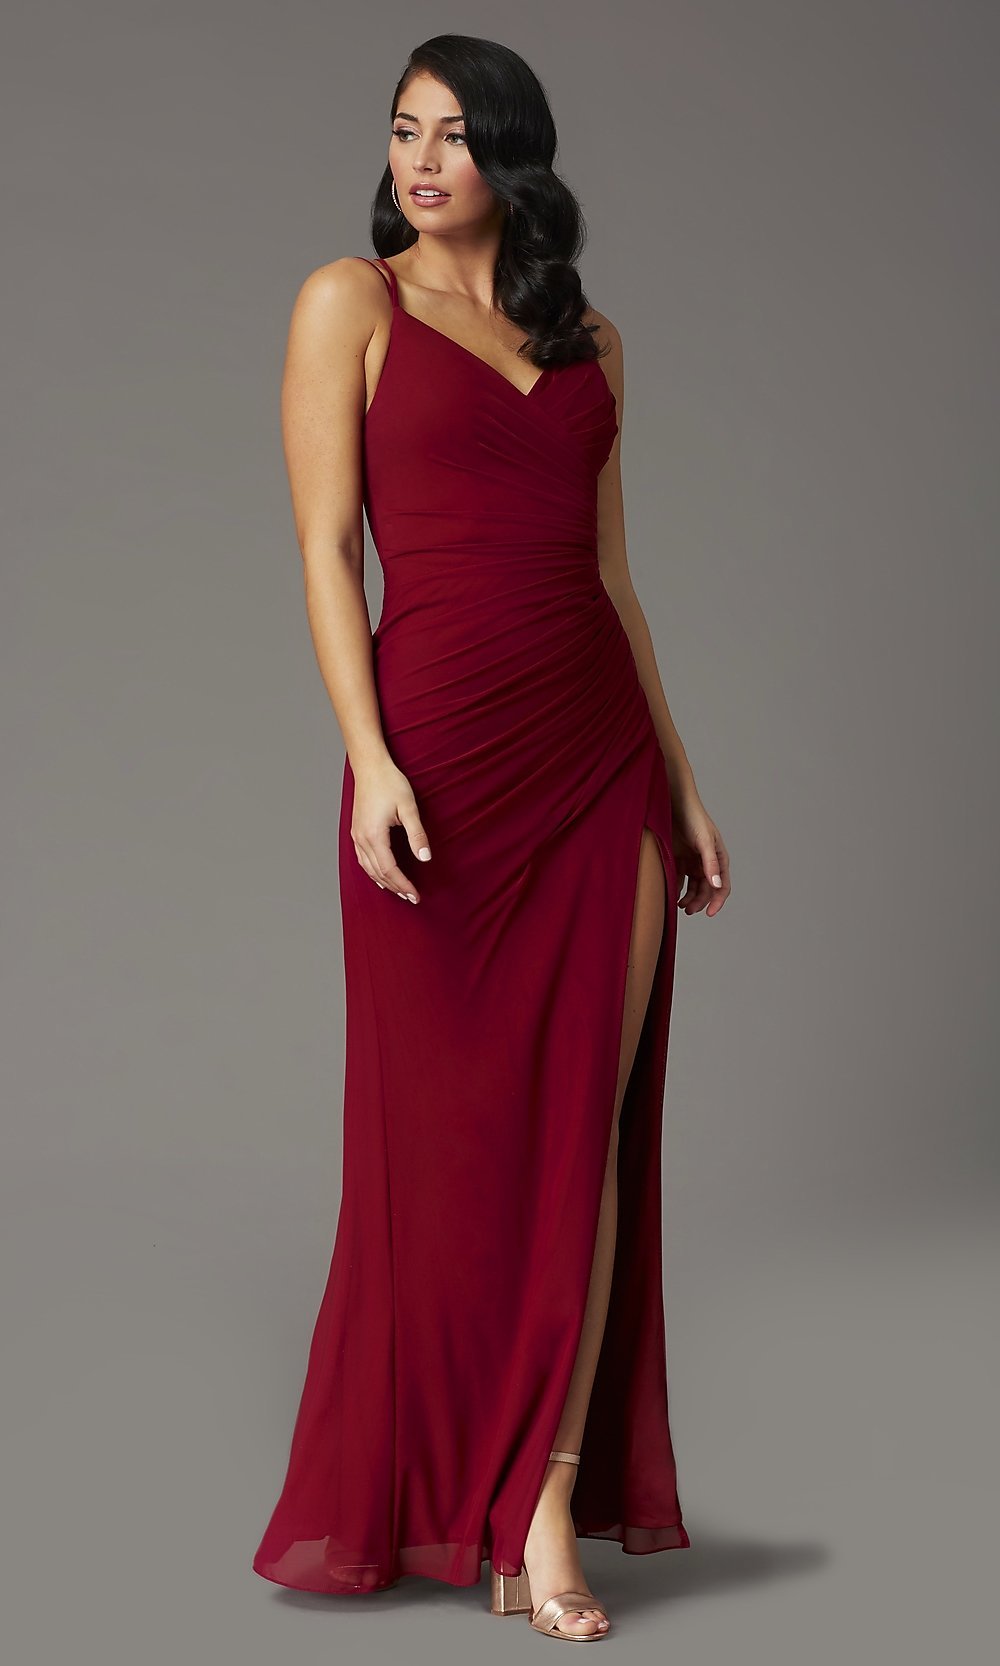 Burgundy V-Neck Ruched Long Classic Formal Gown